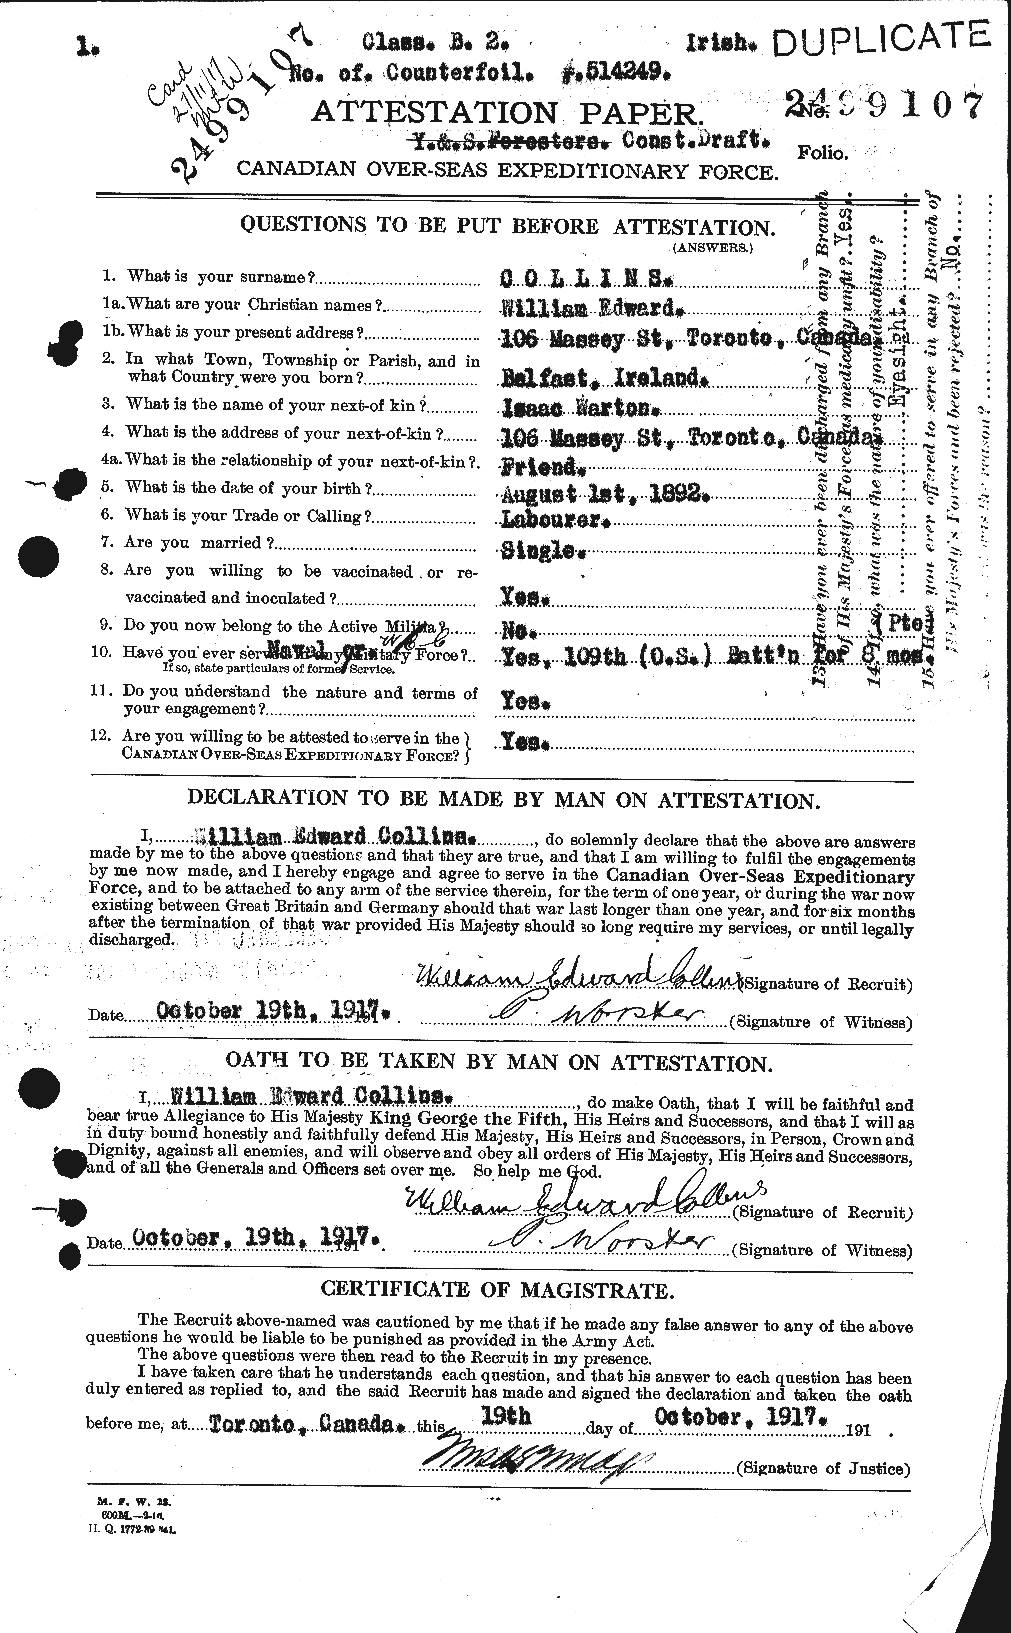 Personnel Records of the First World War - CEF 068800a